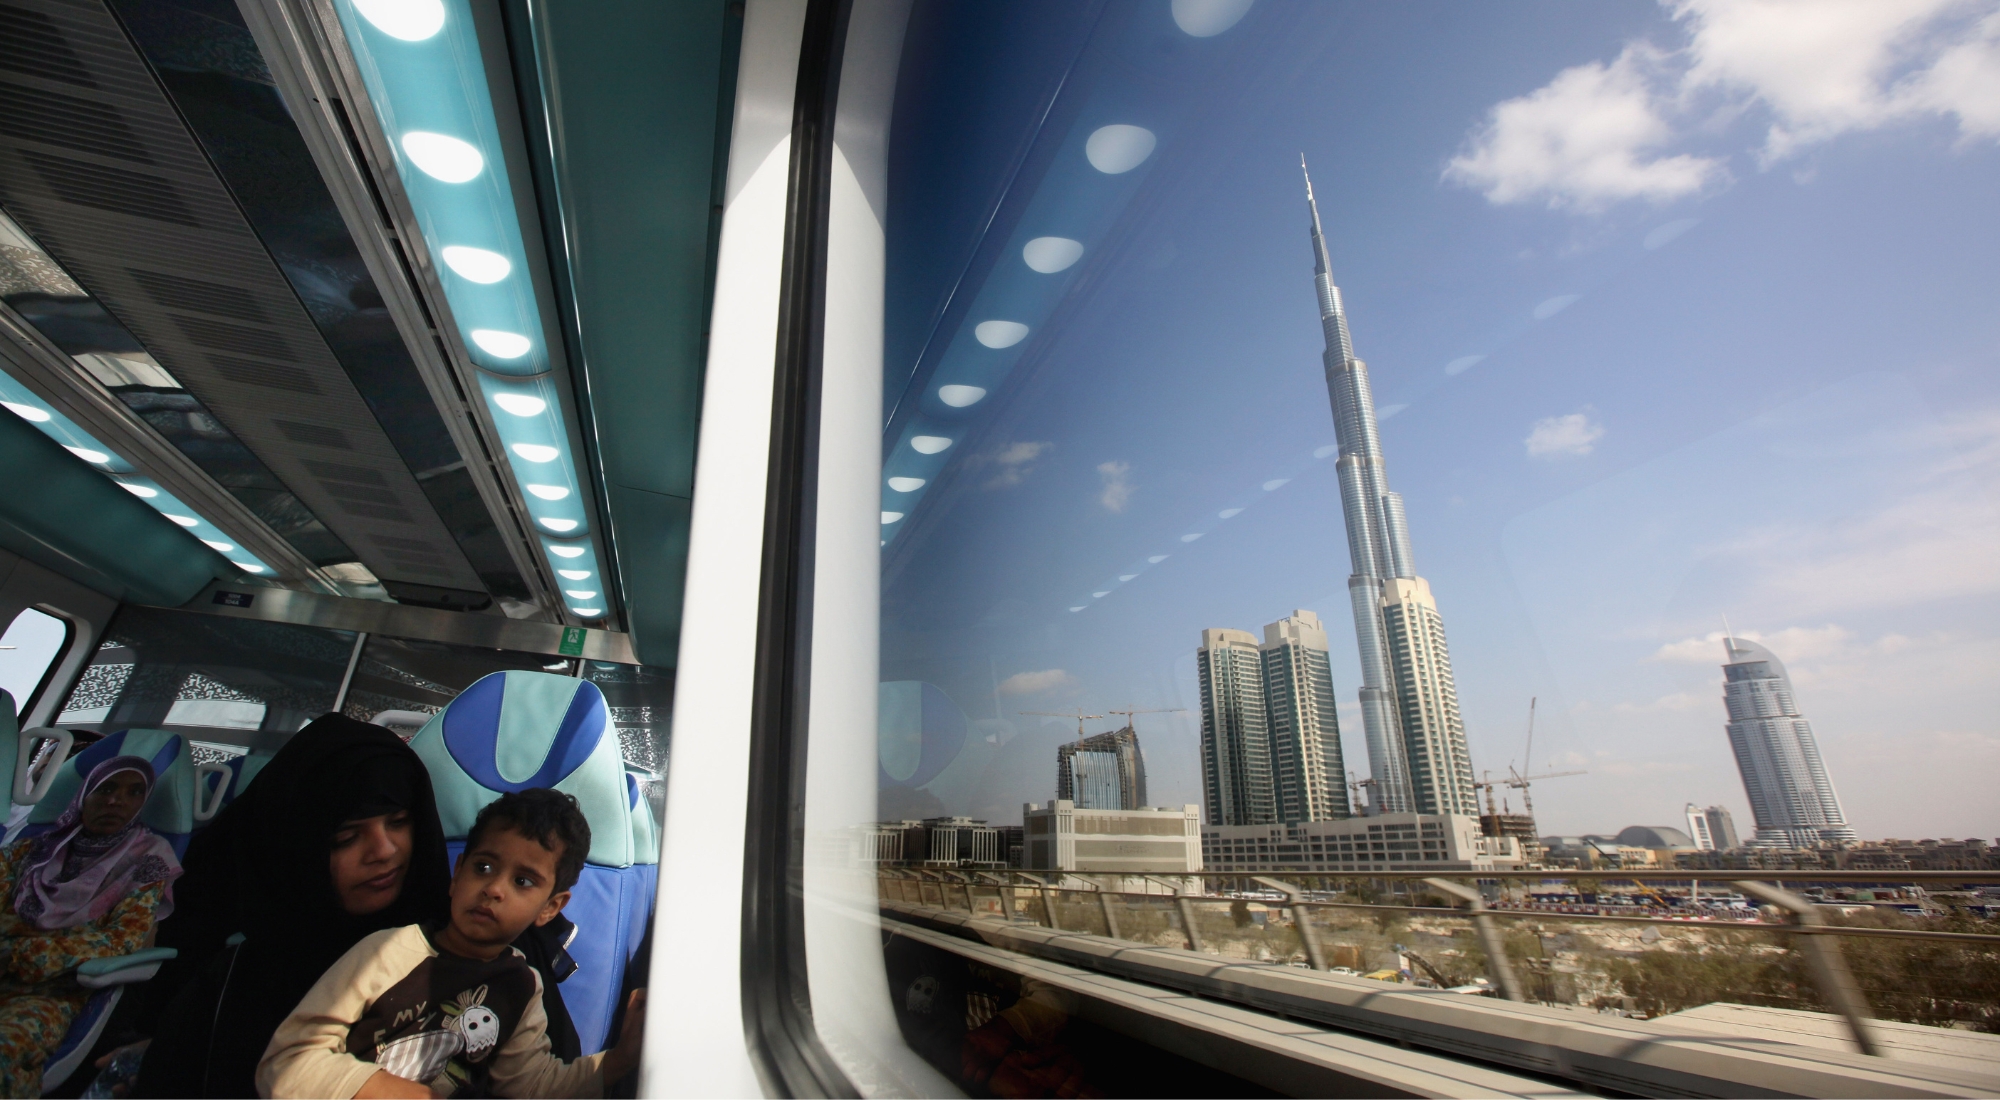 oman and child ride the metro past the Burj Khalifa, the world's tallest building on December 3, 2009 in Dubai, United Arab Emirates. (Photo by Dan Kitwood/Getty Images)